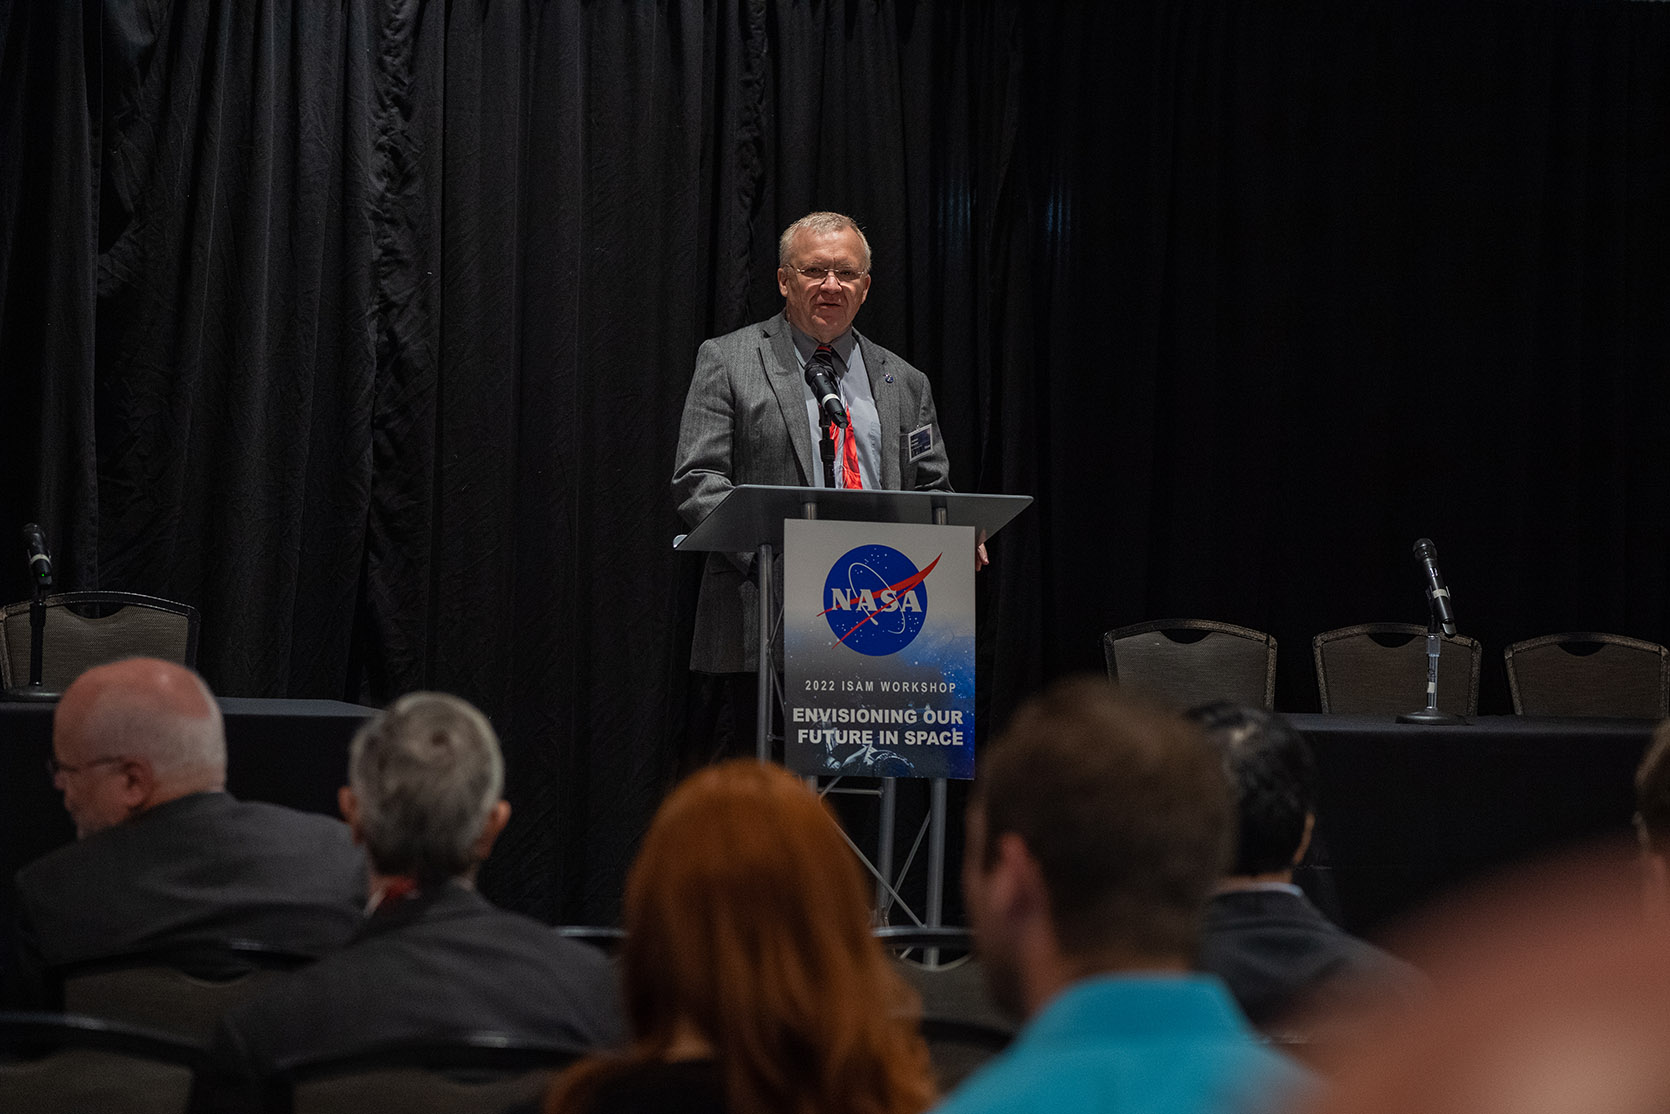 Jim Reuter, NASA associate administrator for the Space Technology Mission Directorate, addresses workshop attendees